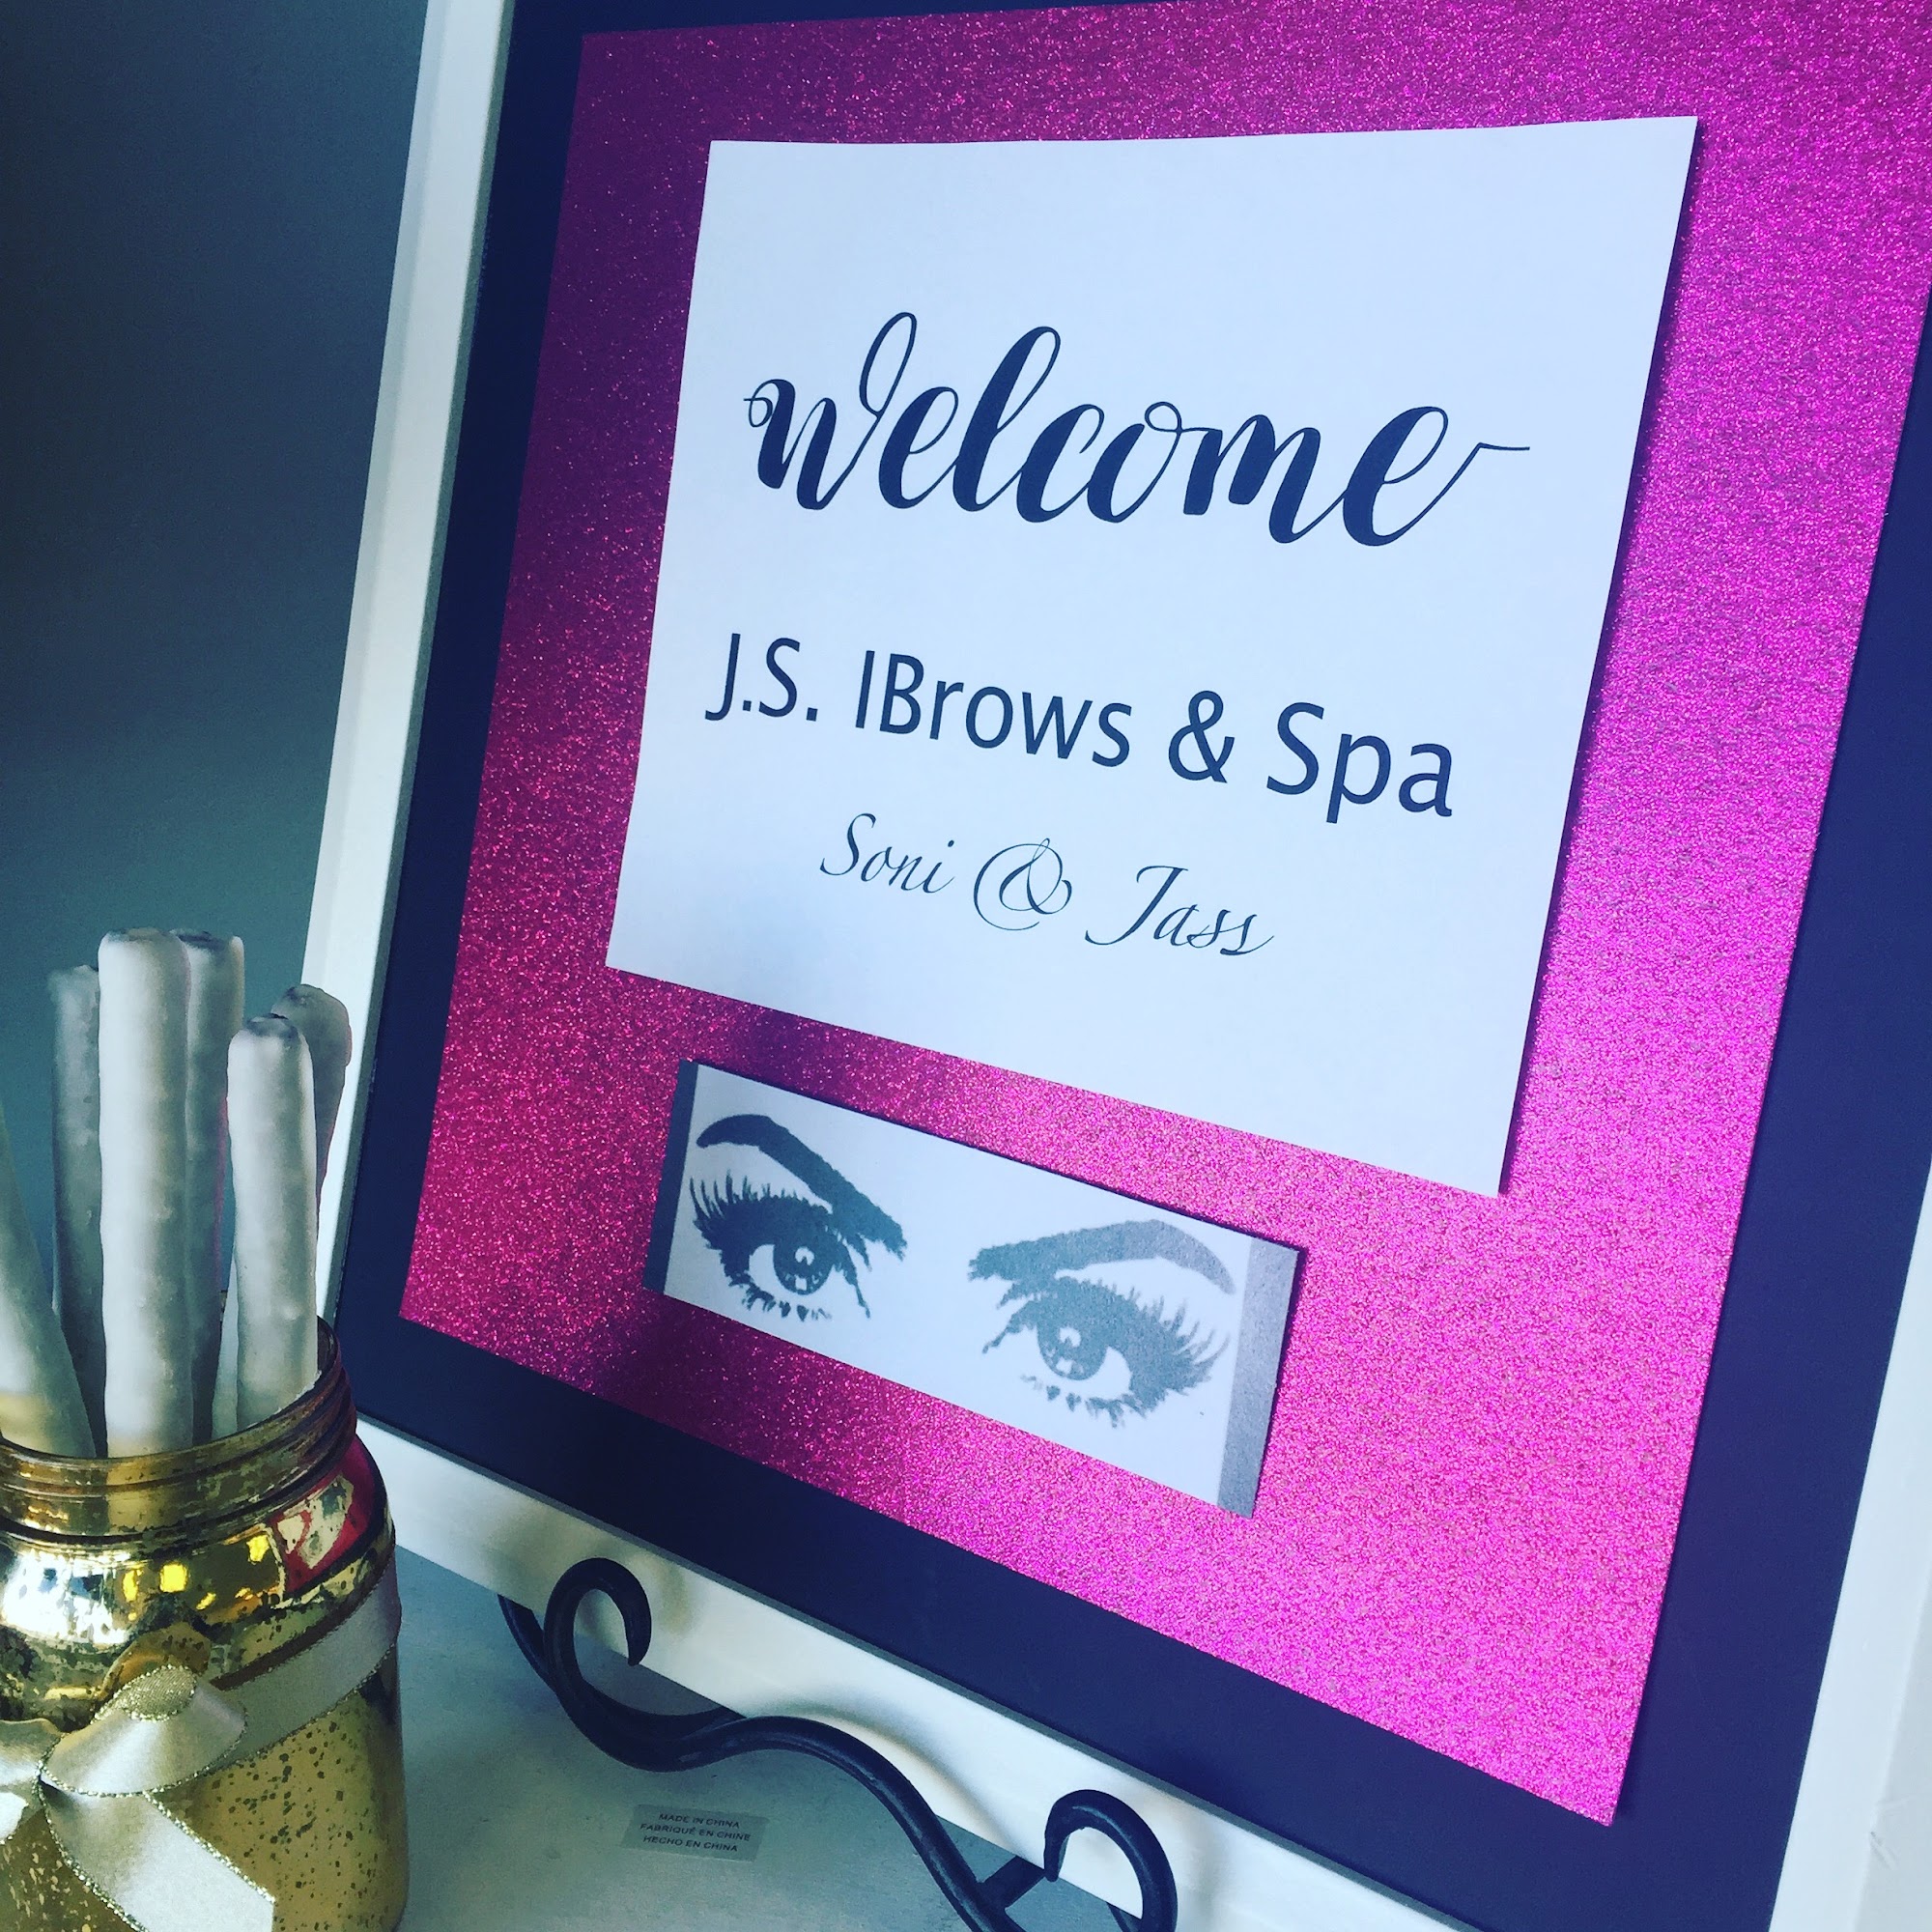 J.S Ibrows & Spa